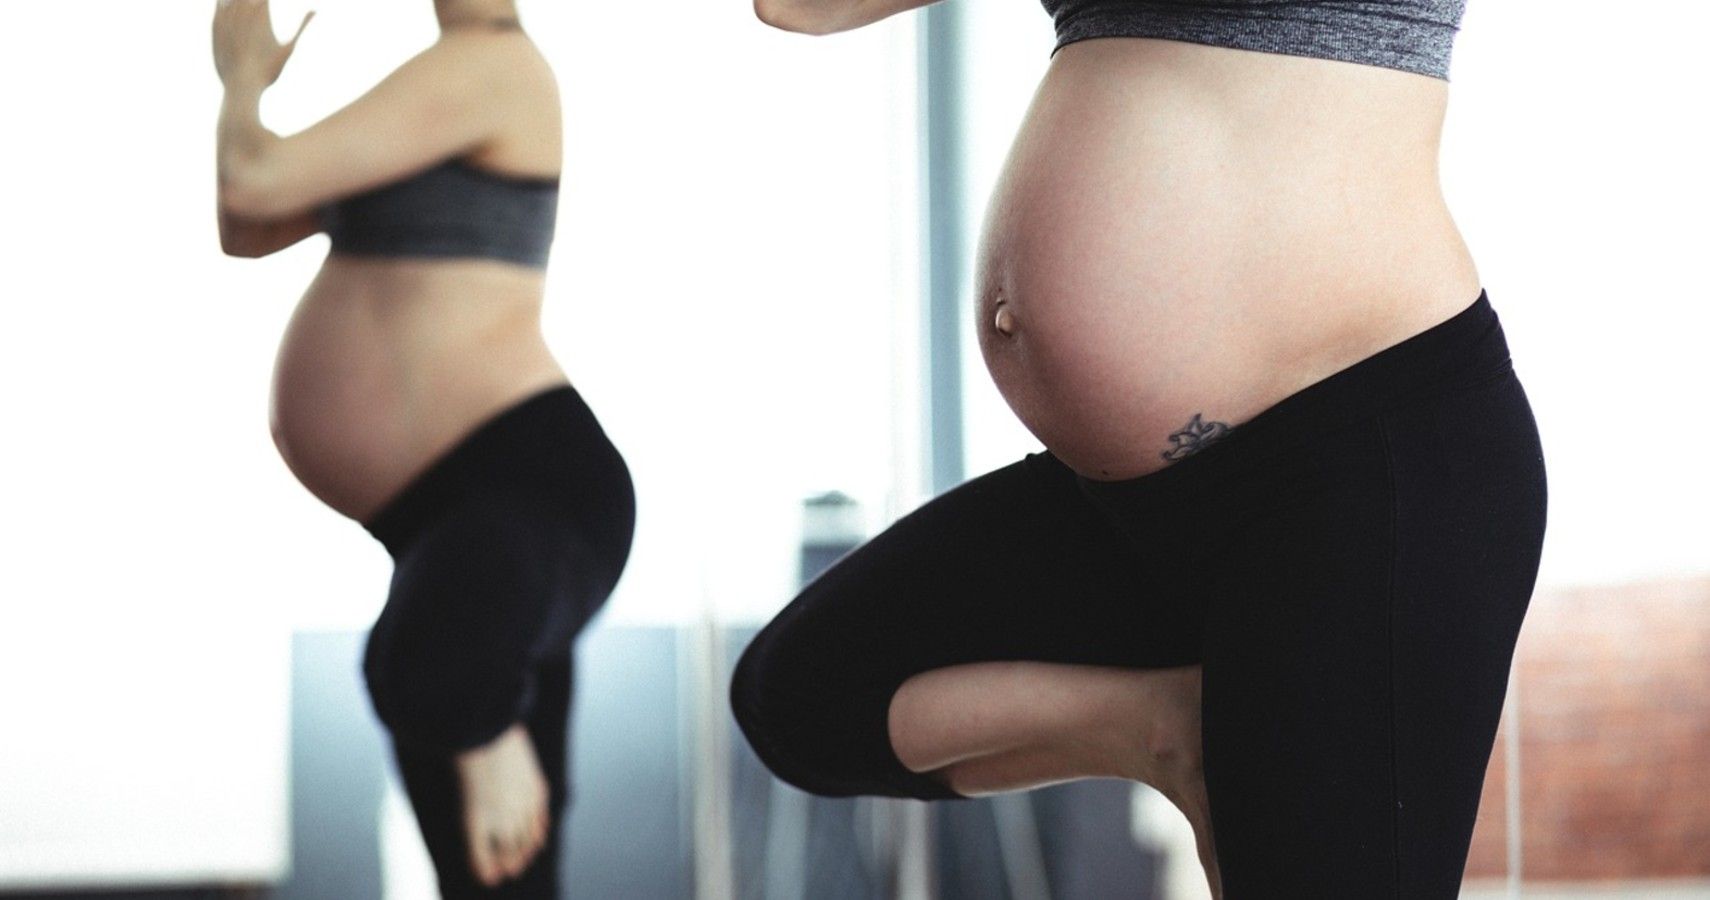 Moms With Higher Education Get More Exercise In Pregnancy: Study